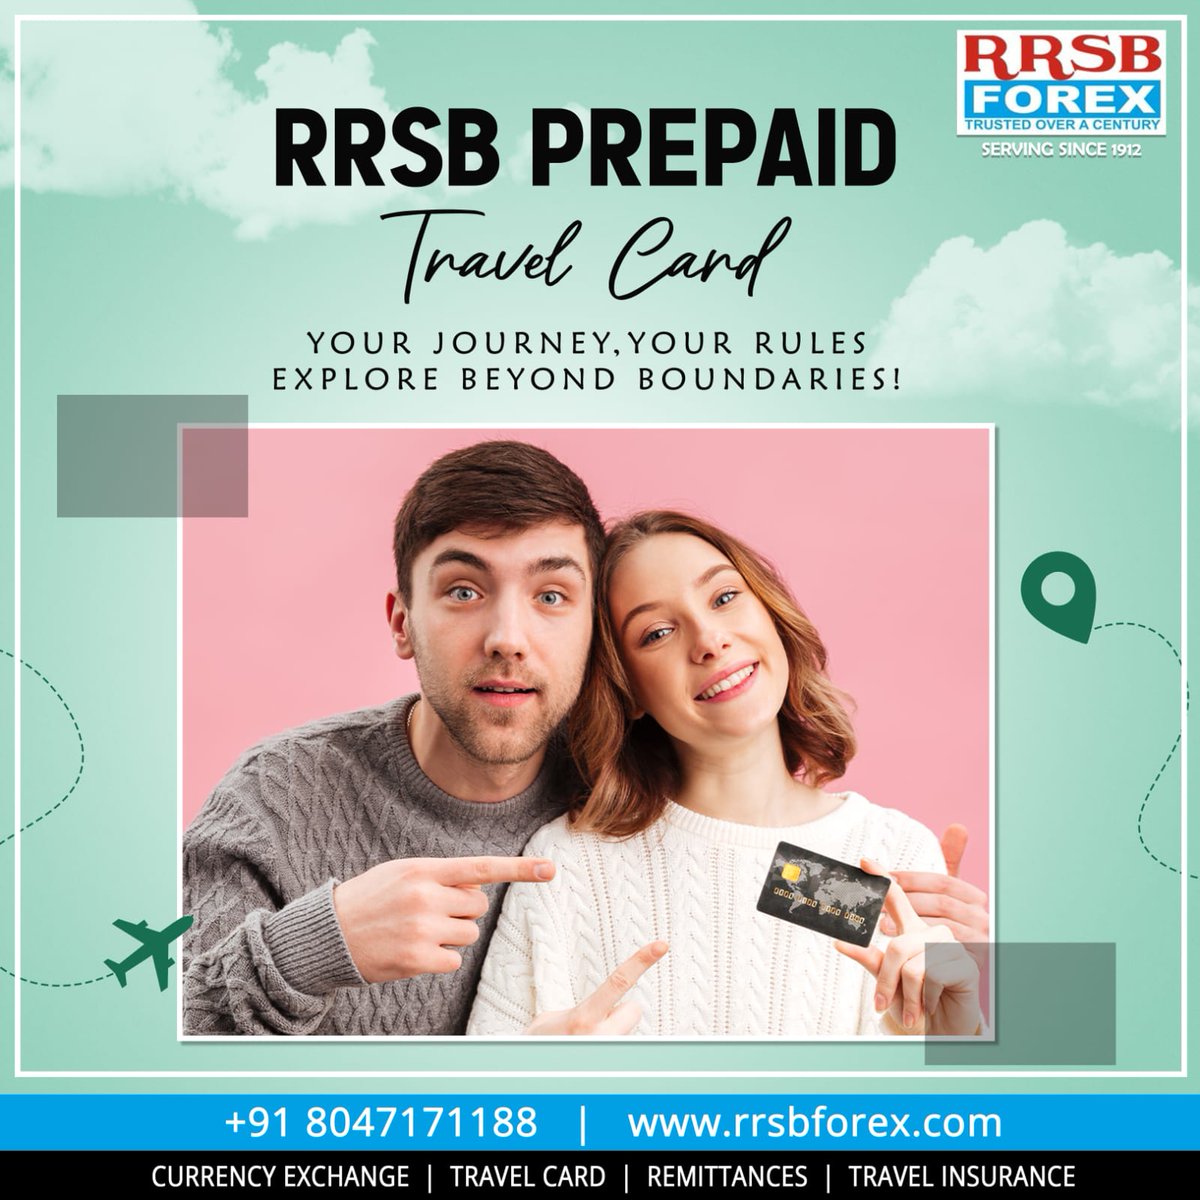 The RRSB Prepaid Travel Card empowers your wanderlust with the freedom to explore uncharted territories. With no boundaries, embark on unforgettable journeys, all under your terms and conditions.

For enquiries: +91 8047171188

#forex #money #forexlifestyle #RRSBForex  #RRSBForex